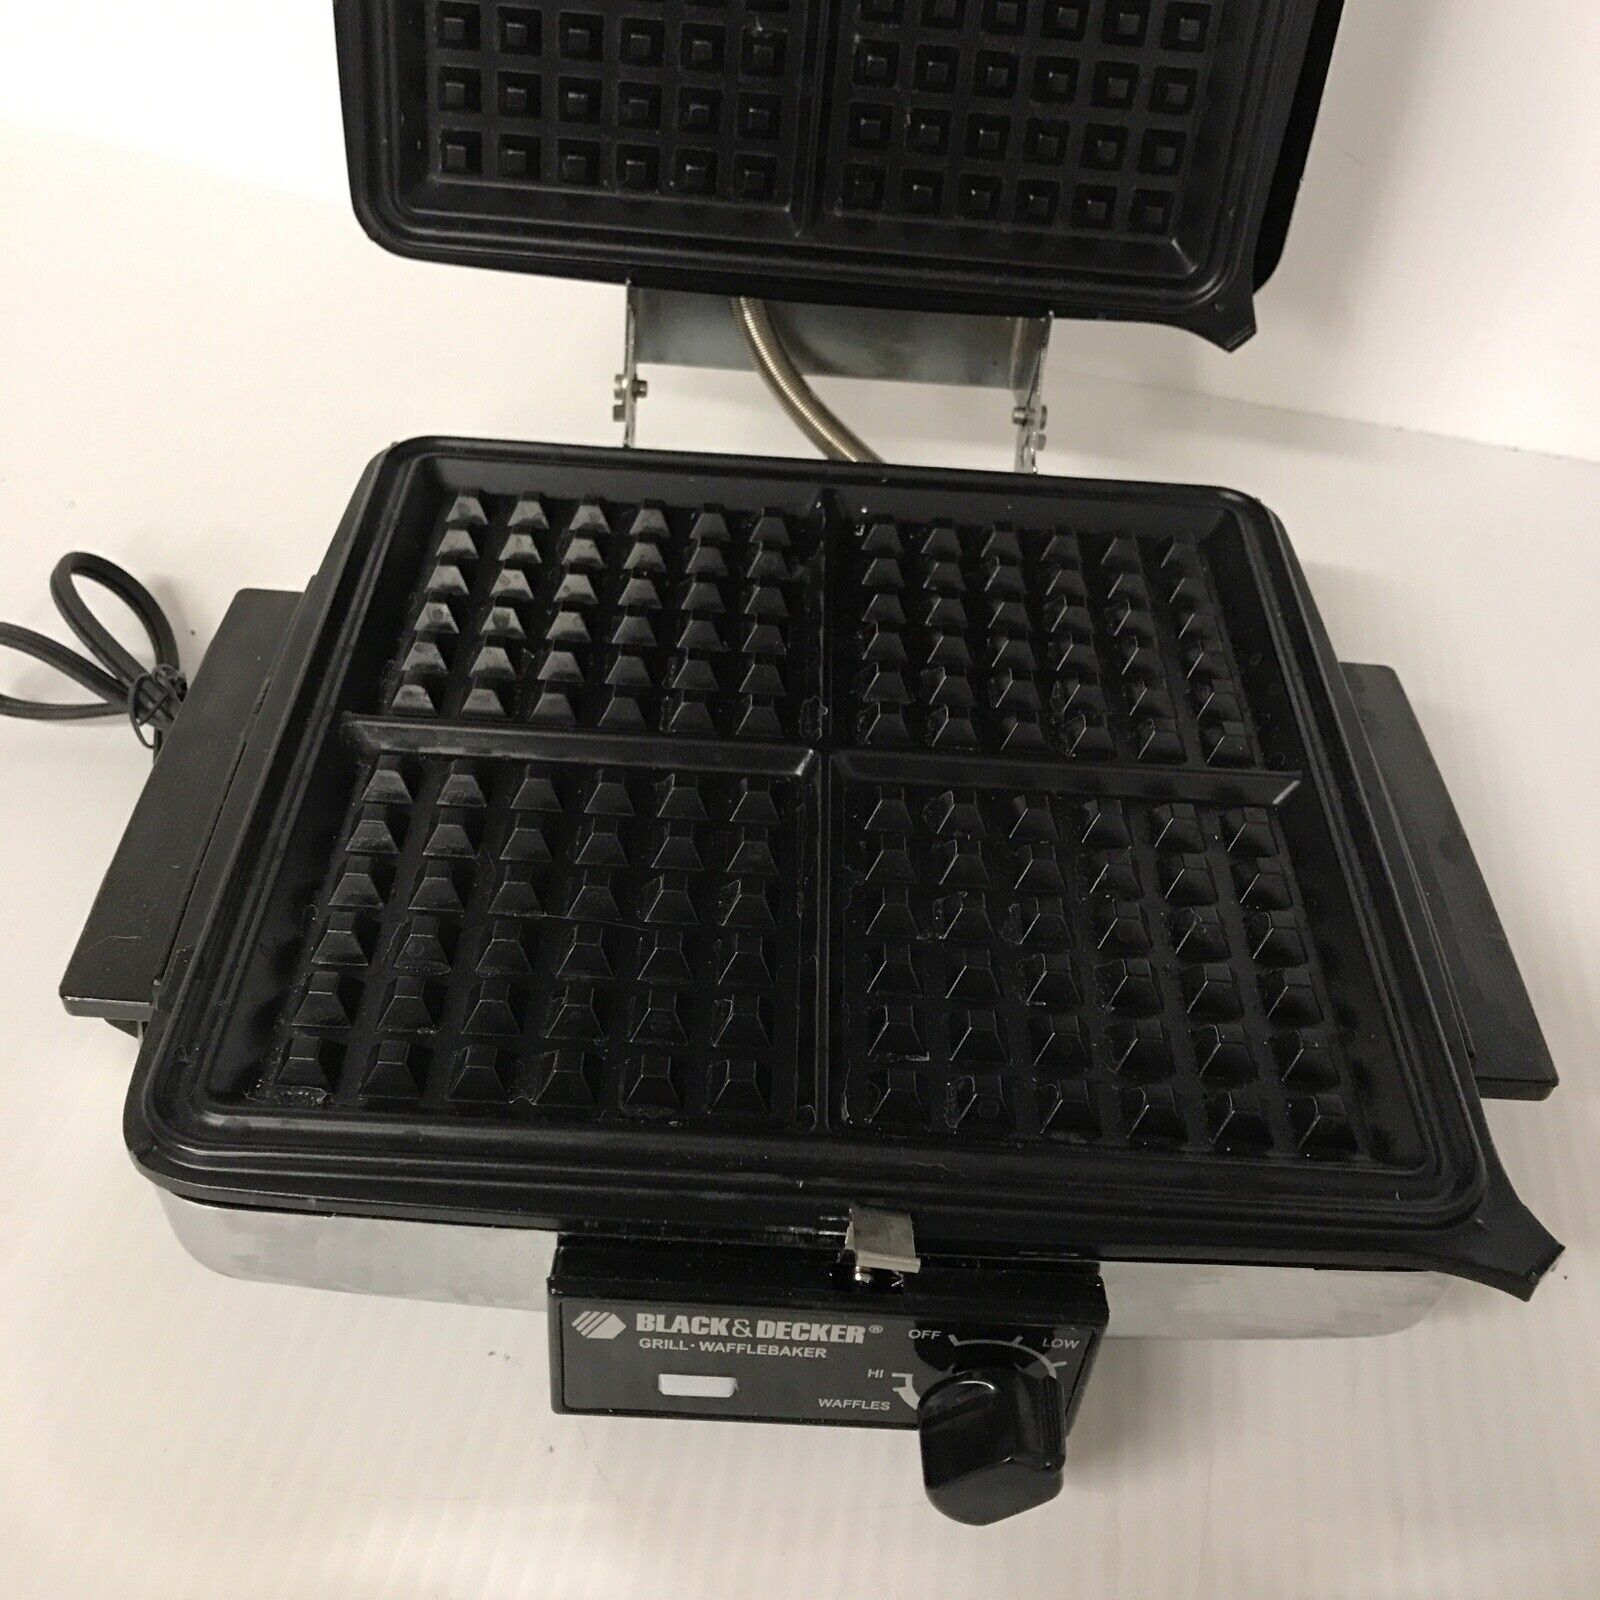 Black And Decker Waffle Maker Square Grill Model G48td Type 2 Tested Works